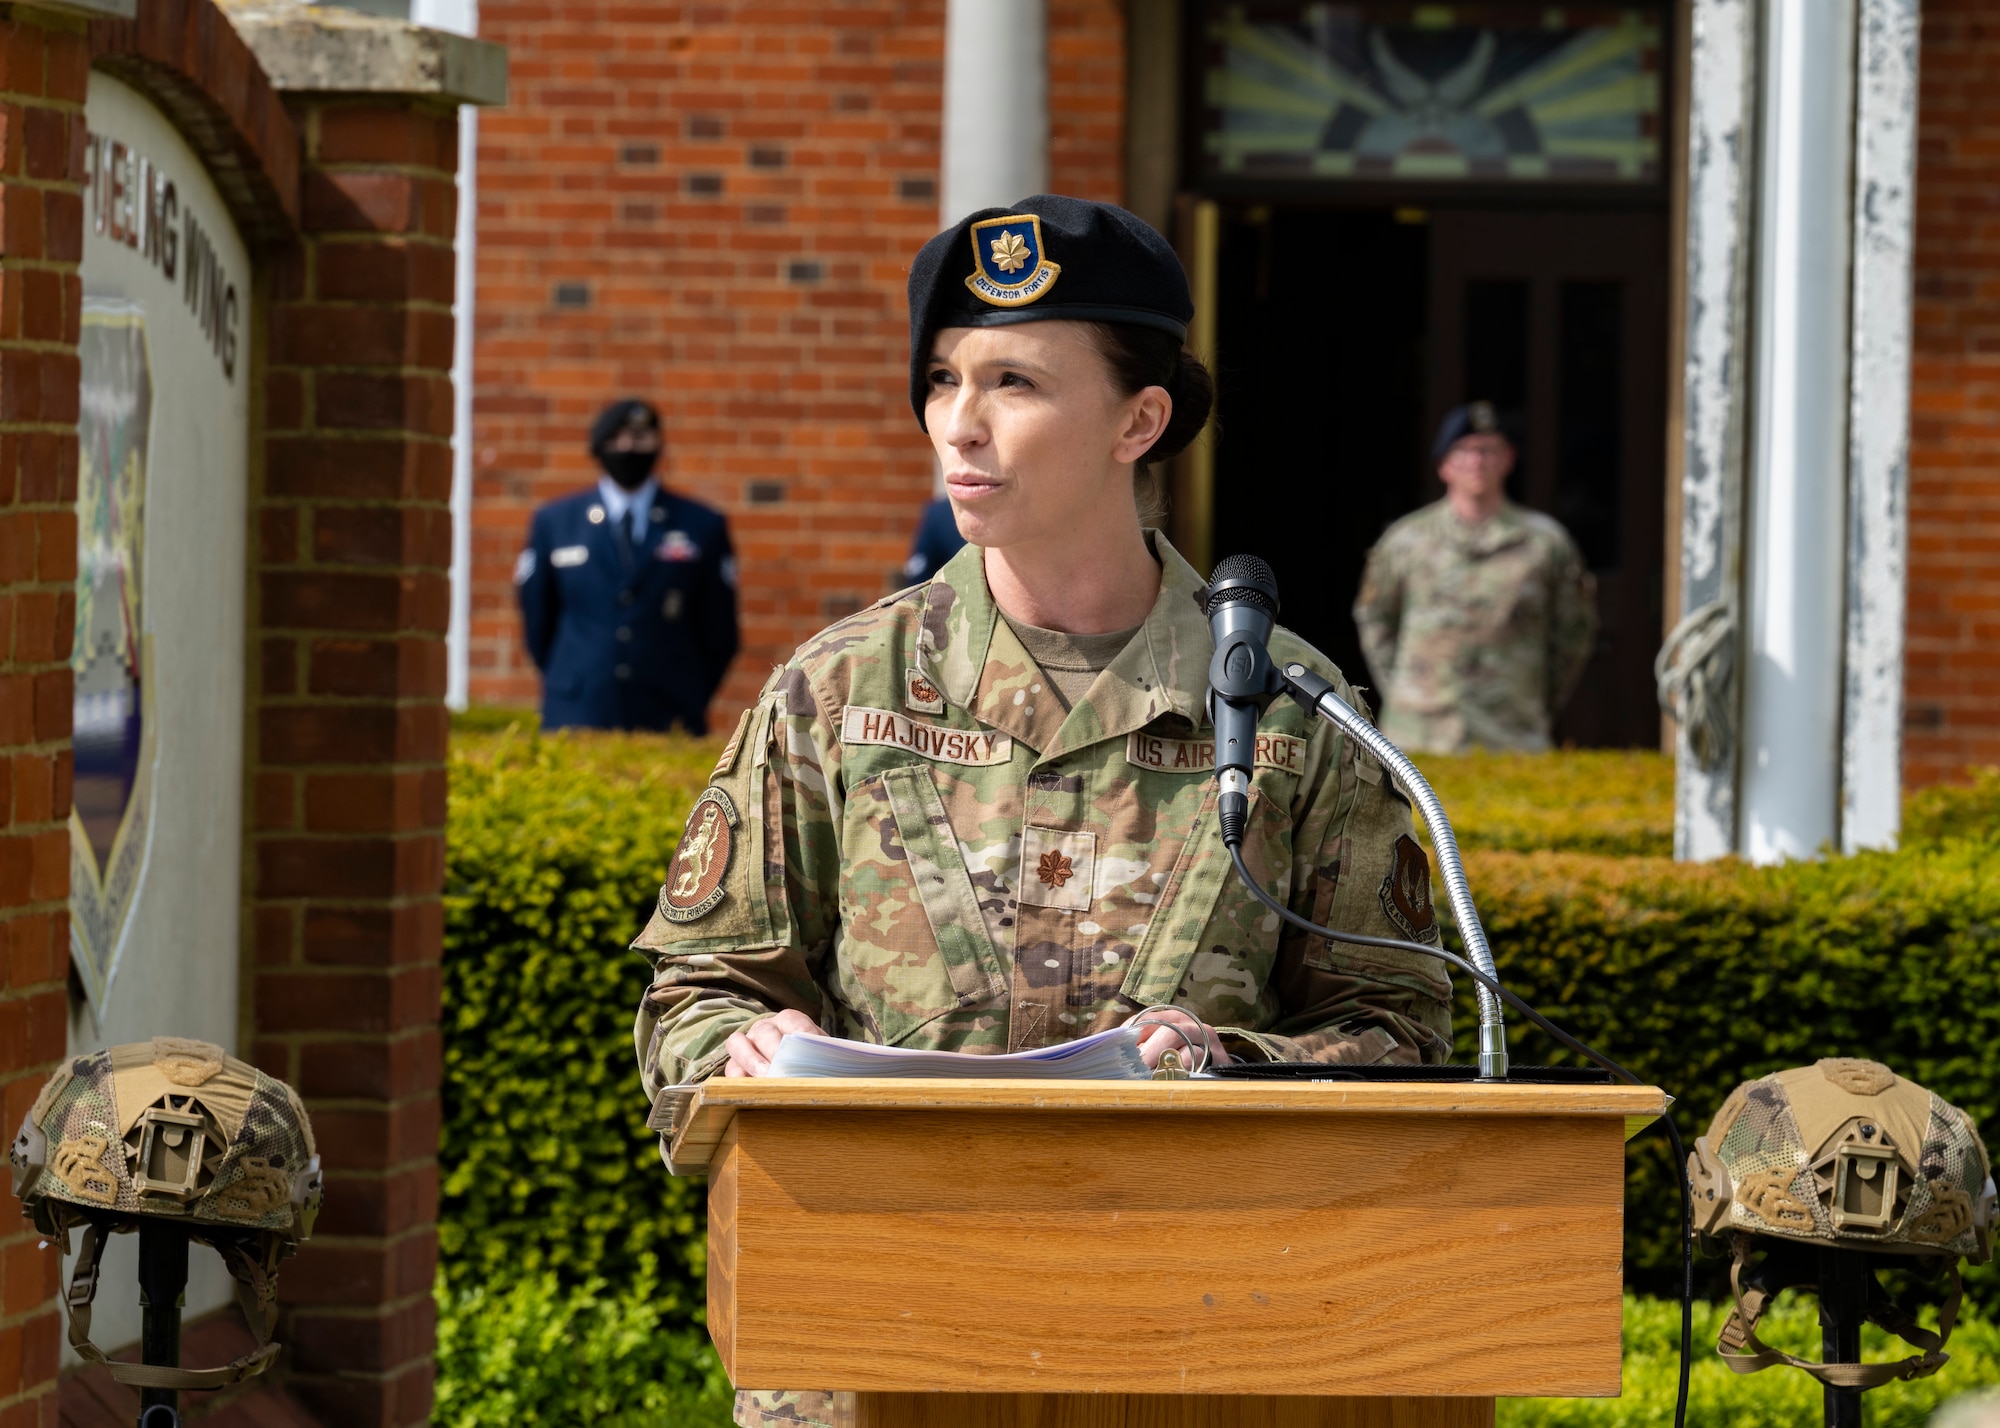 Team Mildenhall personnel gathered for various events and ceremonies during the week in honor of the Defenders who serve their country, defend the bases and protect the Airmen.